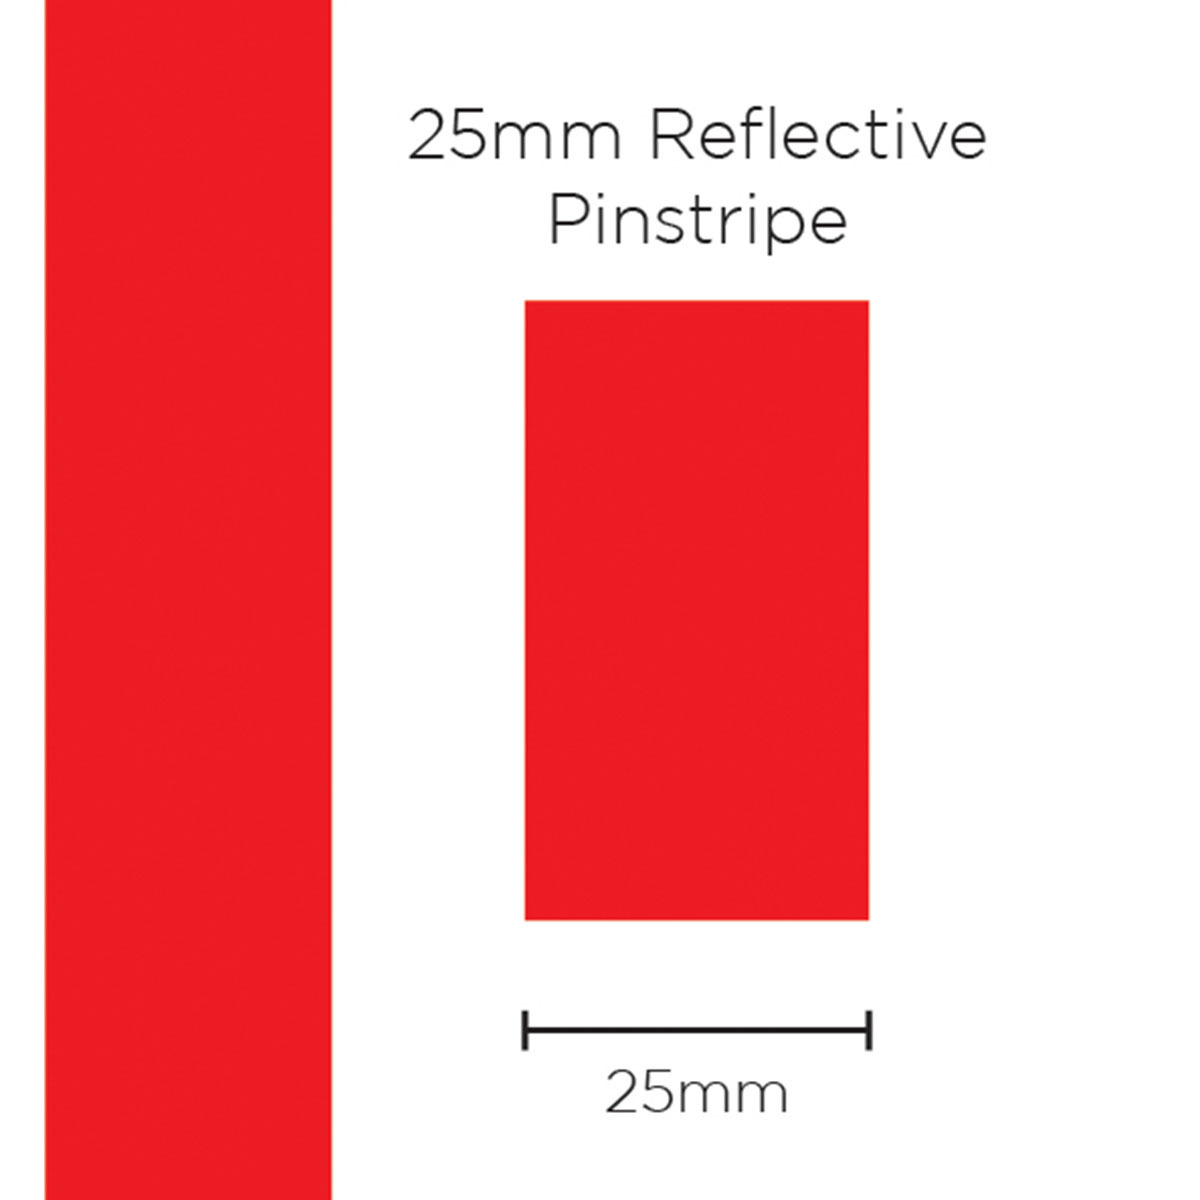 Pinstripe Reflective Red 25mm x 1mt